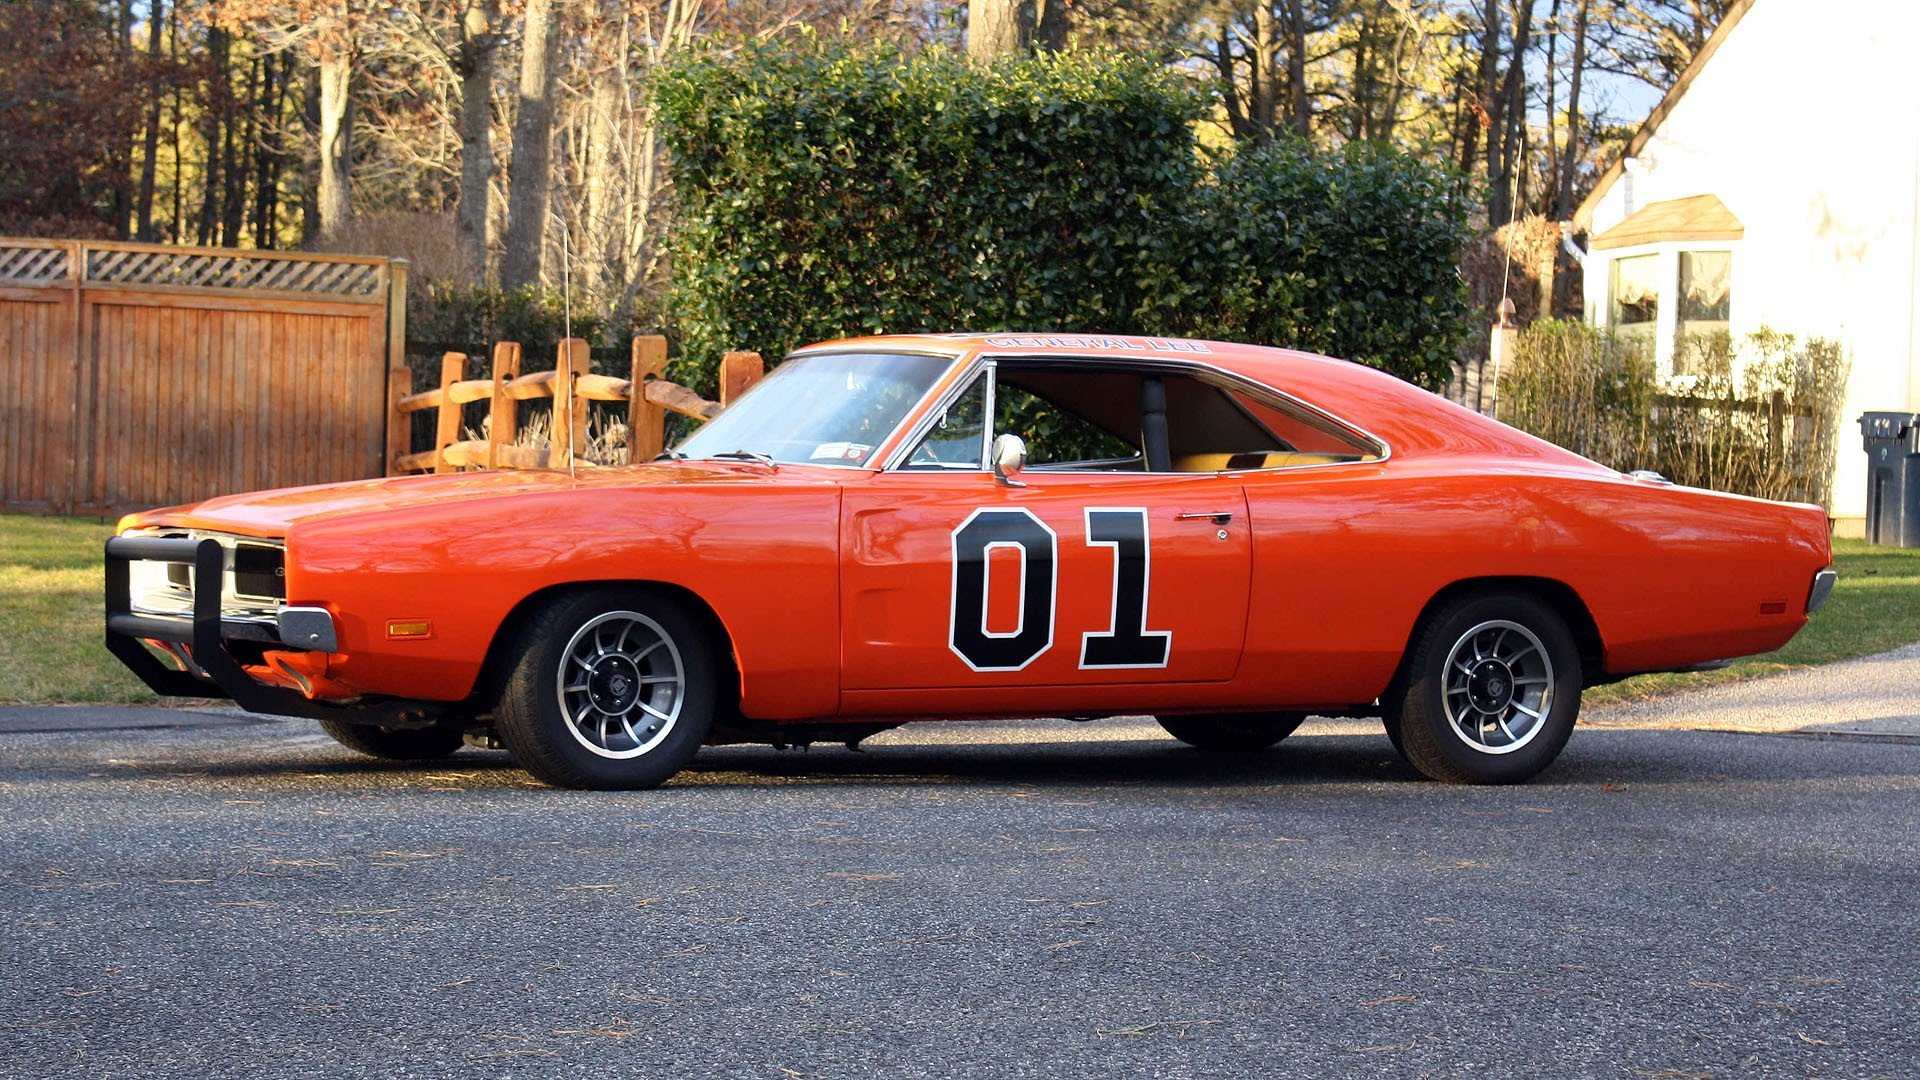 Charger Dukes Of Hazzard General Lee Classic Cars Widescreen Wallpaper